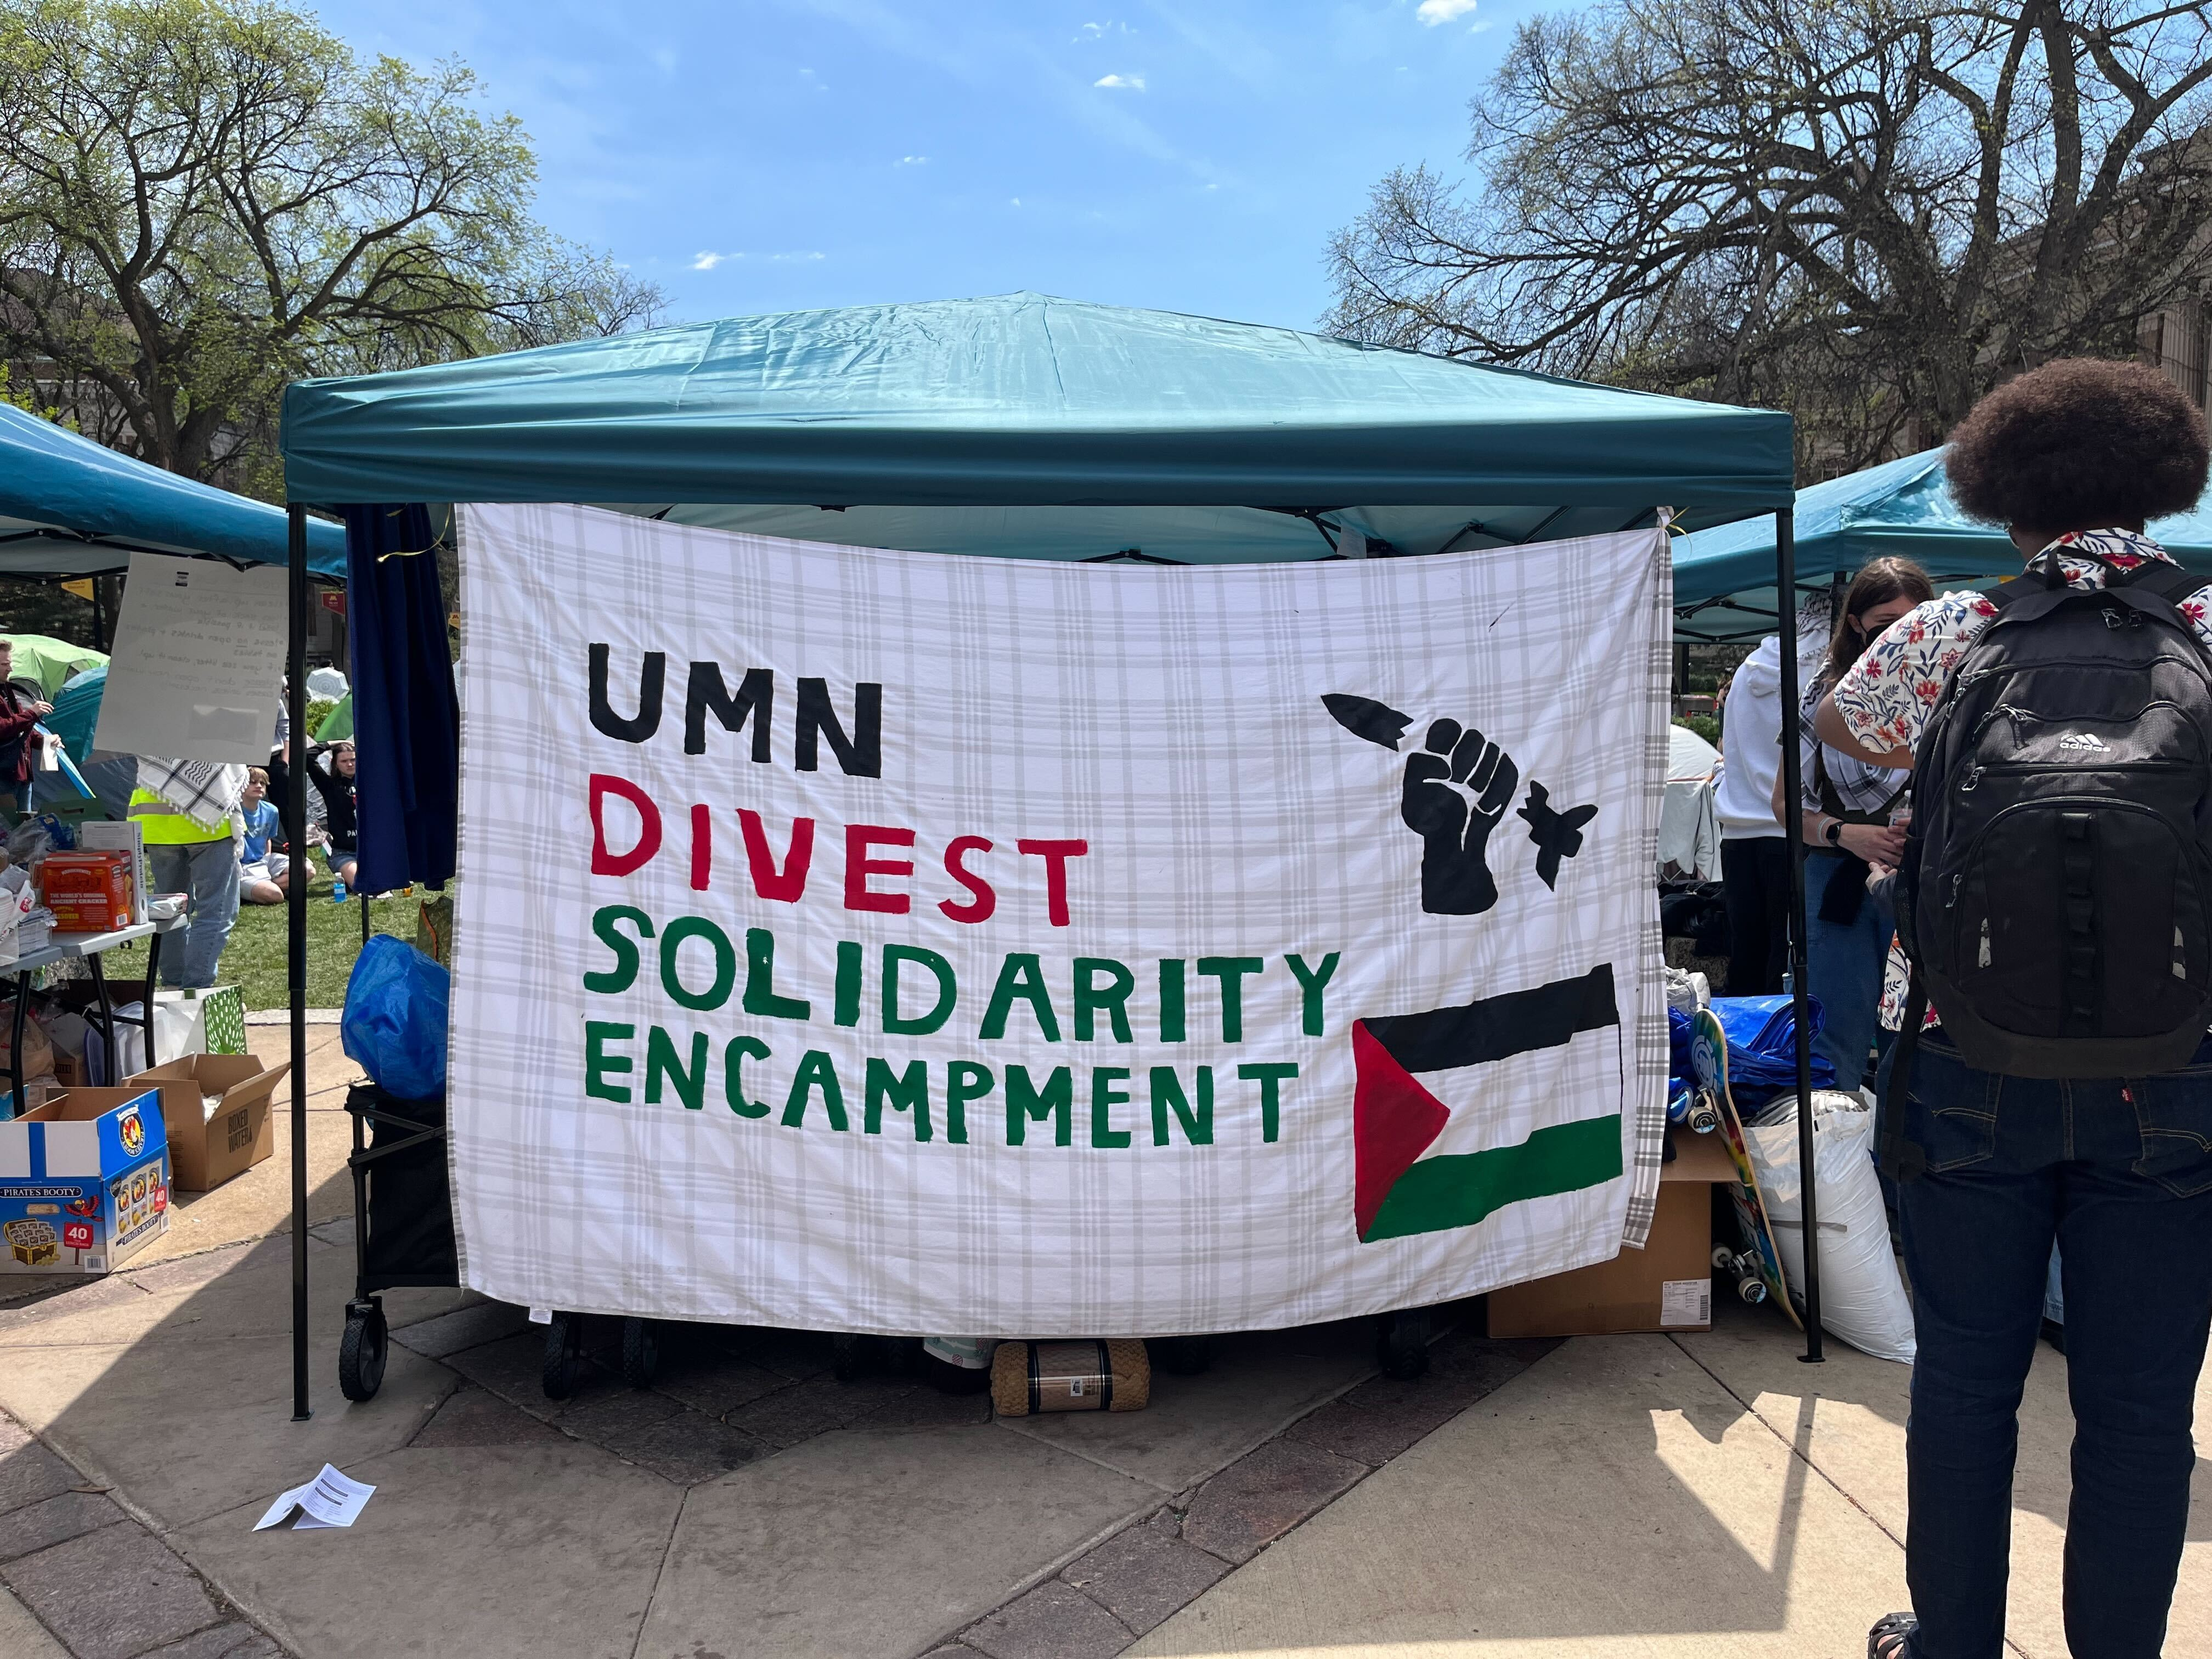 Students at University Of Minnesota continuing to protest at new encampment